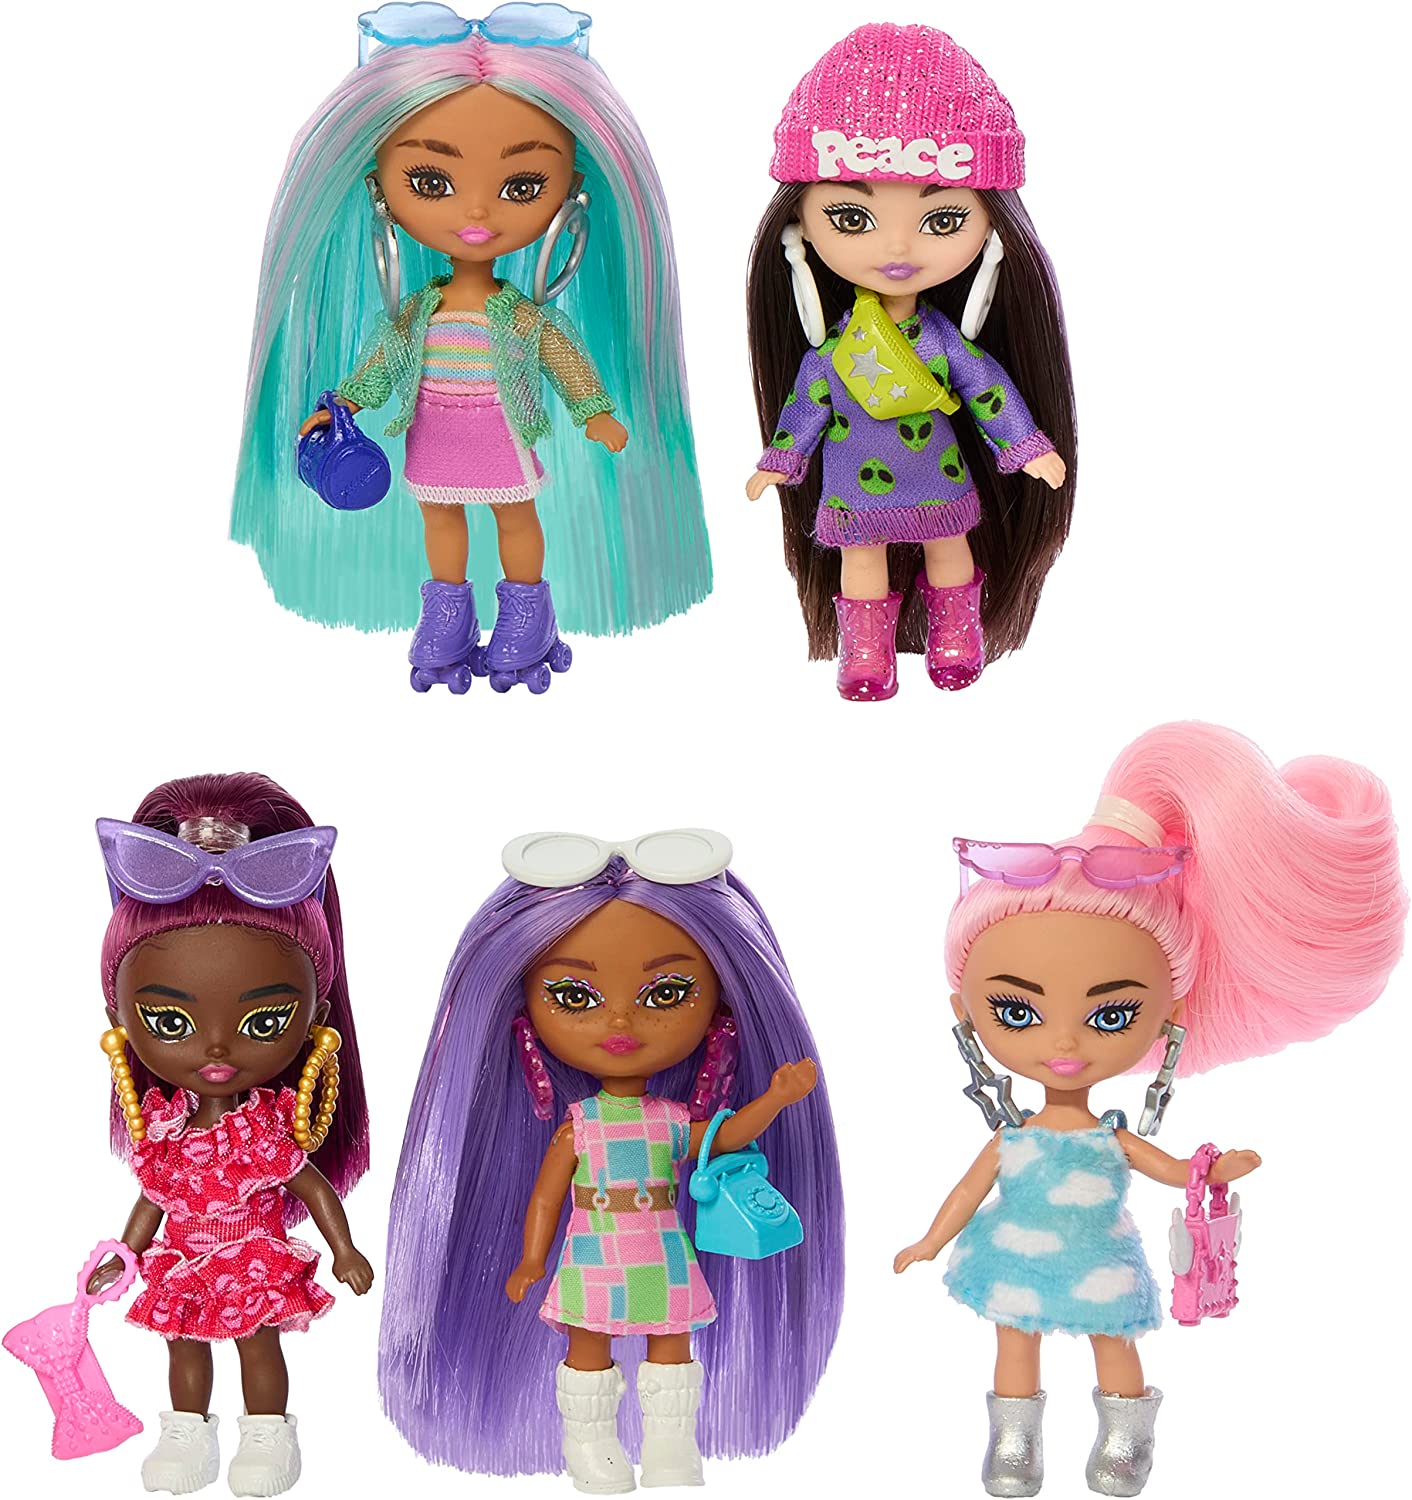 Barbie Extra Mini Minis 5-doll pack with 2 exclusive dolls - YouLoveIt.com